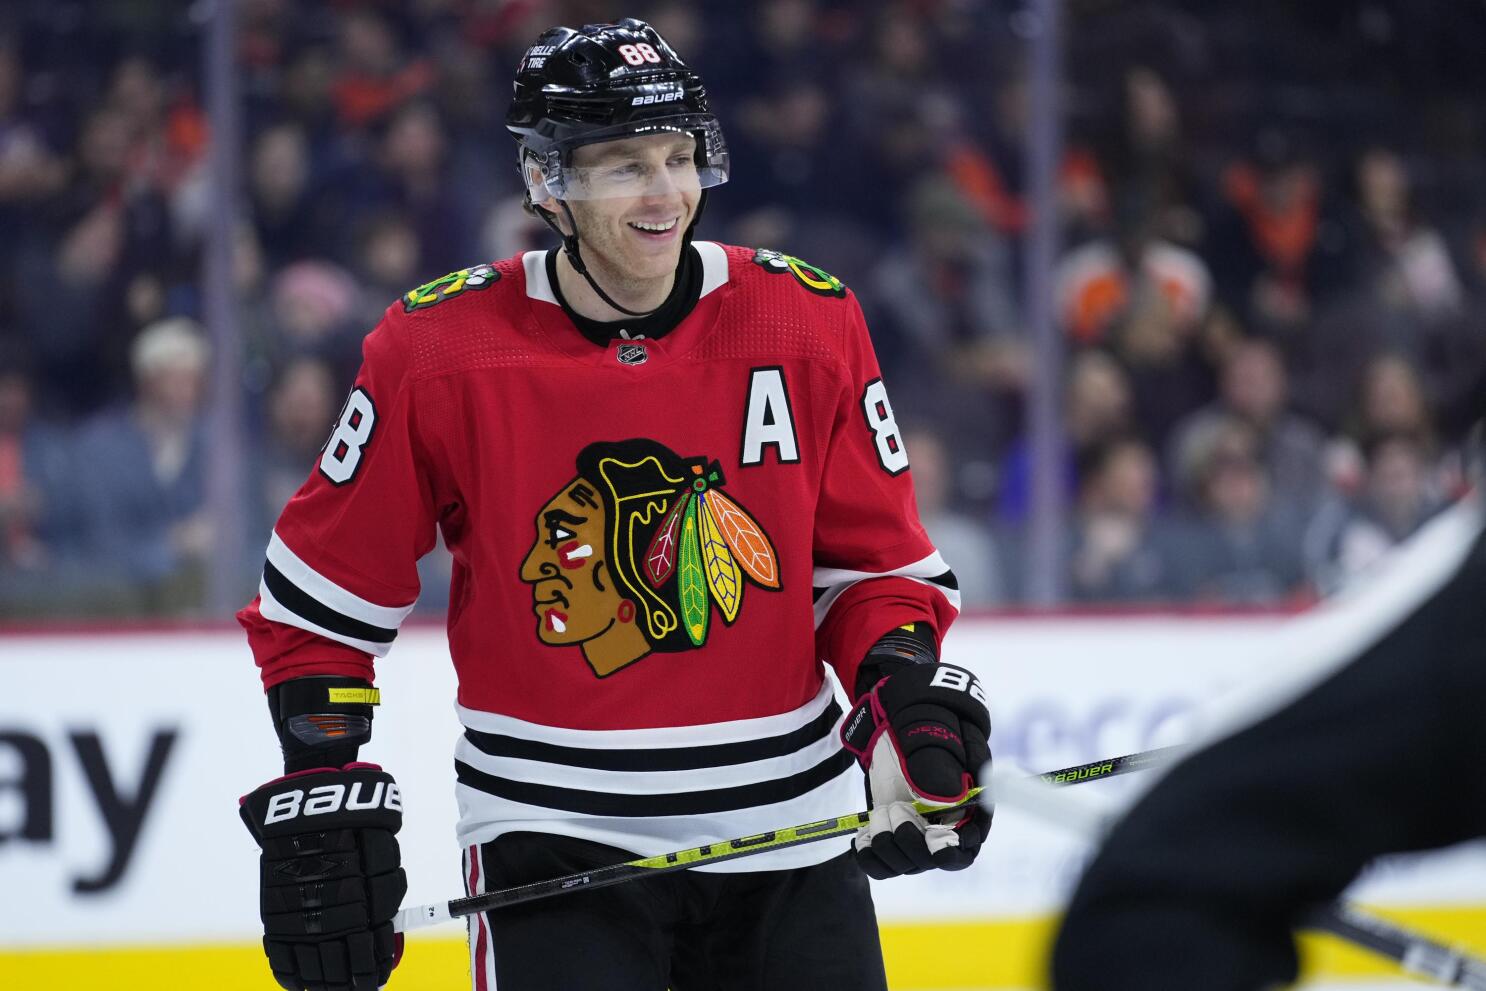 Might the rebuilding Blackhawks be good trade partners for the cap